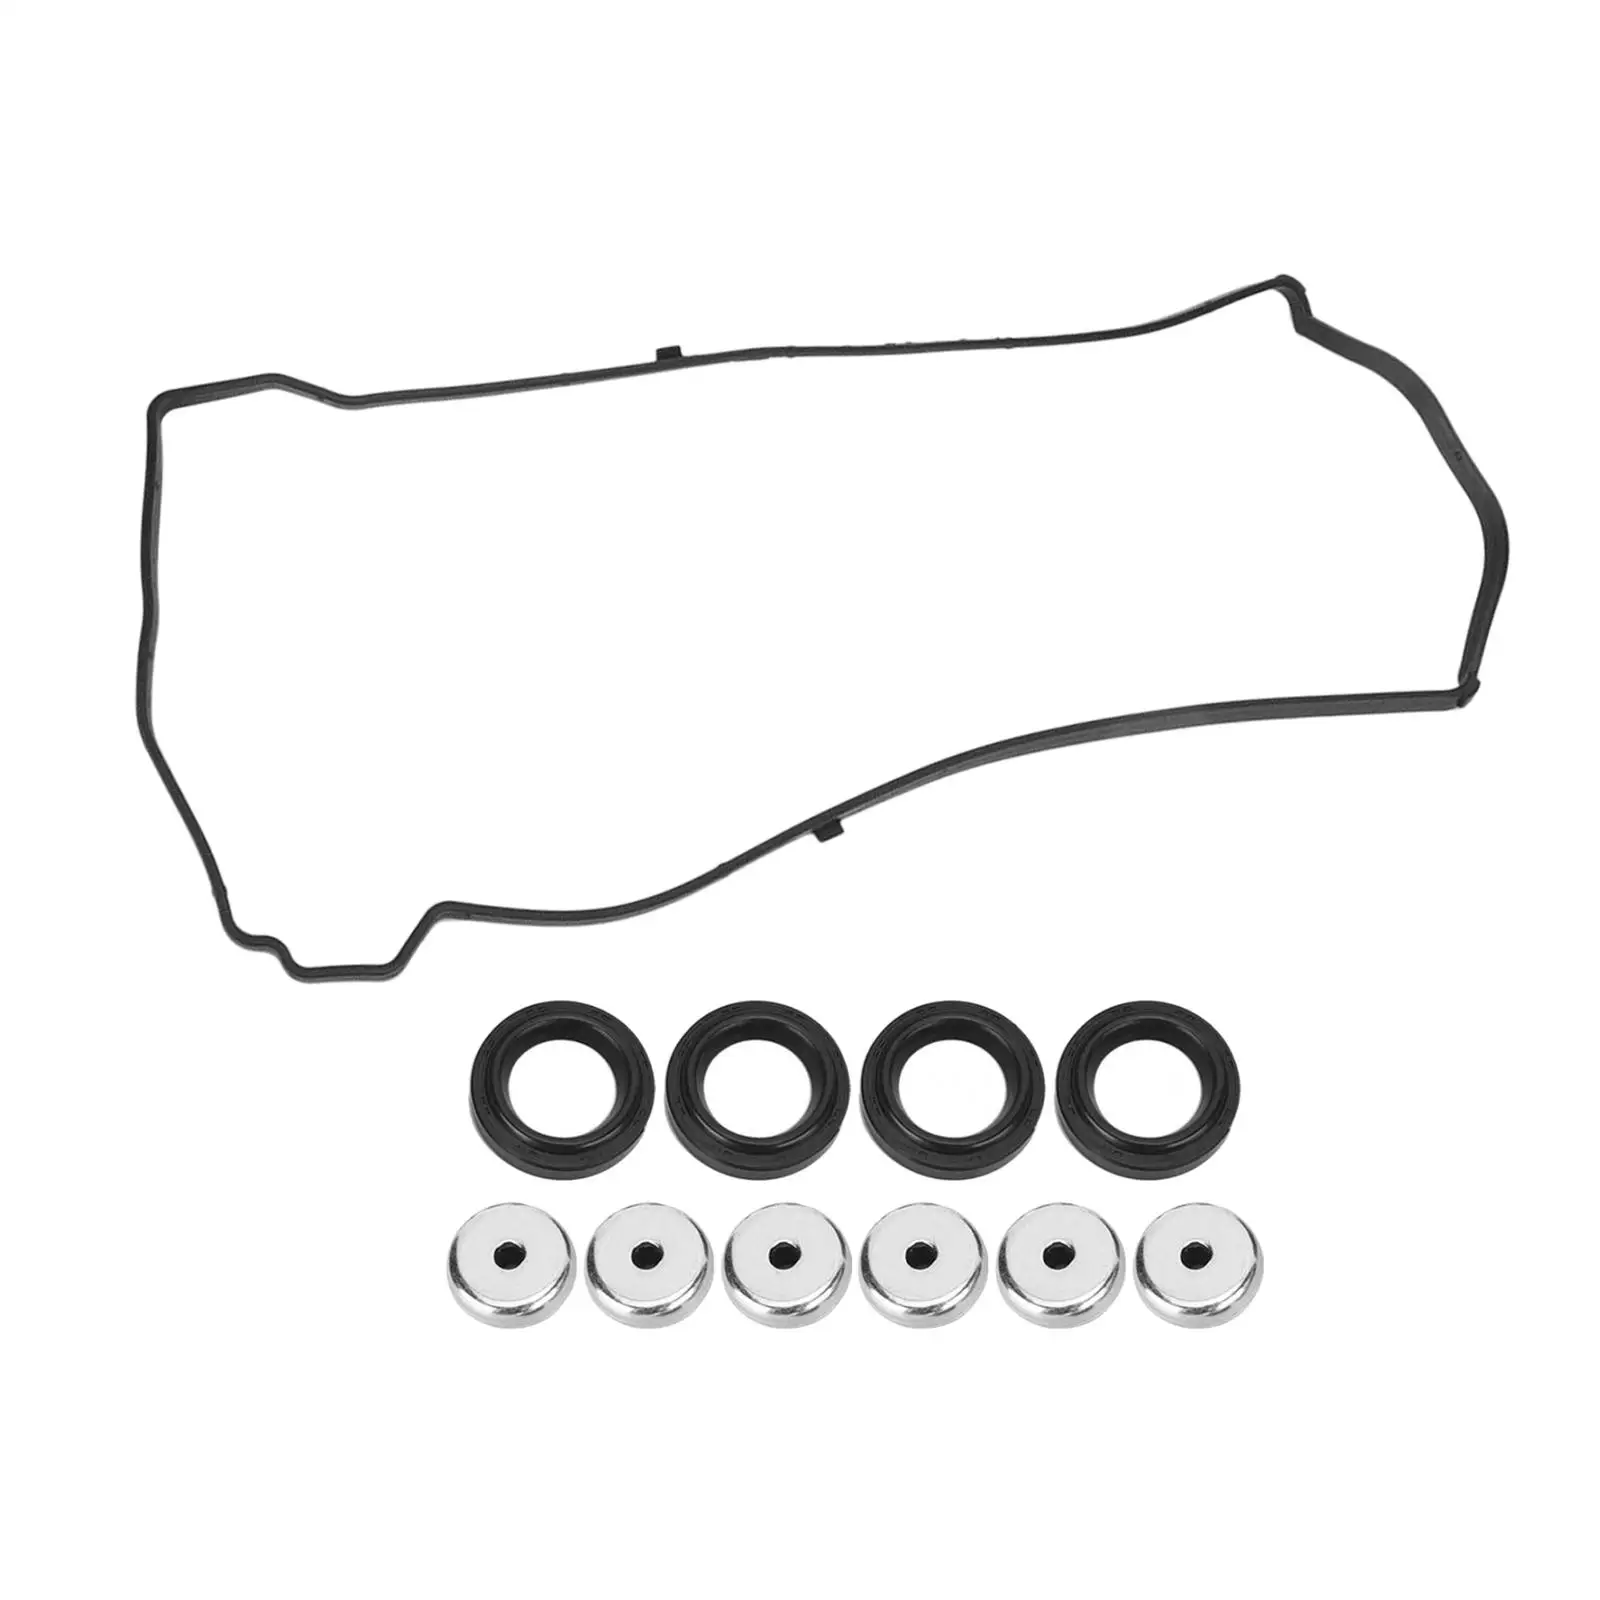 Valve Cover Gasket Seal 12030-pnc-000 Durable Assembly Direct Replaces Car Accessories for Honda Acura RSX Tsx K20 K24 CRV